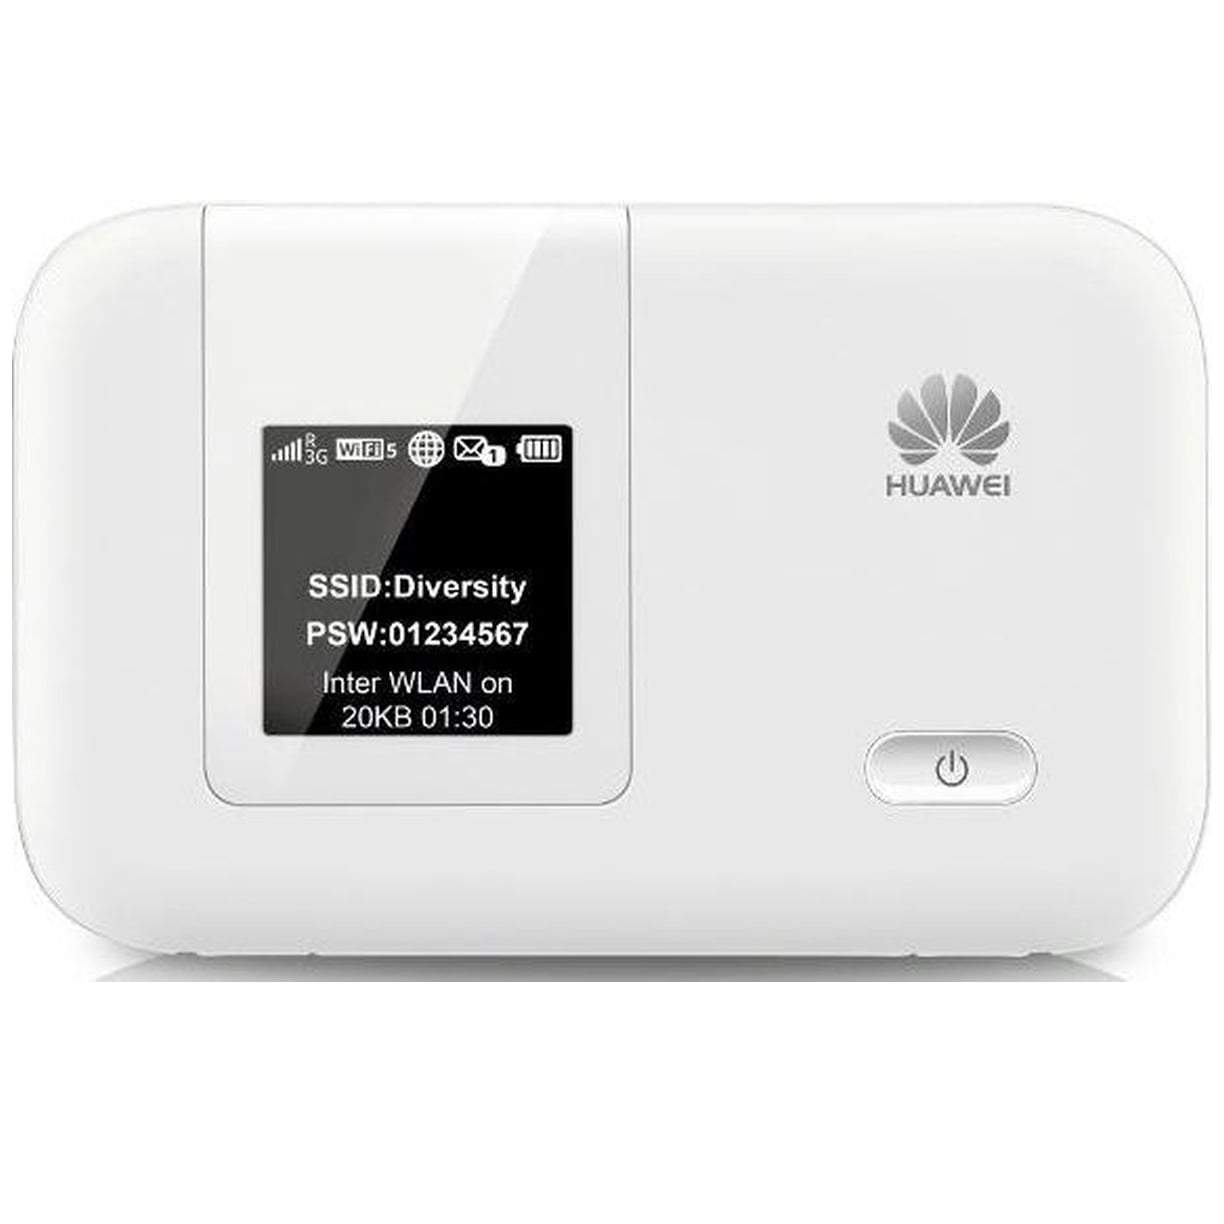 Huawei E5372s-32 | Huawei E5372TS-32 LTE Mobile WiFi Hotspot Router (4G LTE in Europe, Asia, Middle East, Africa)